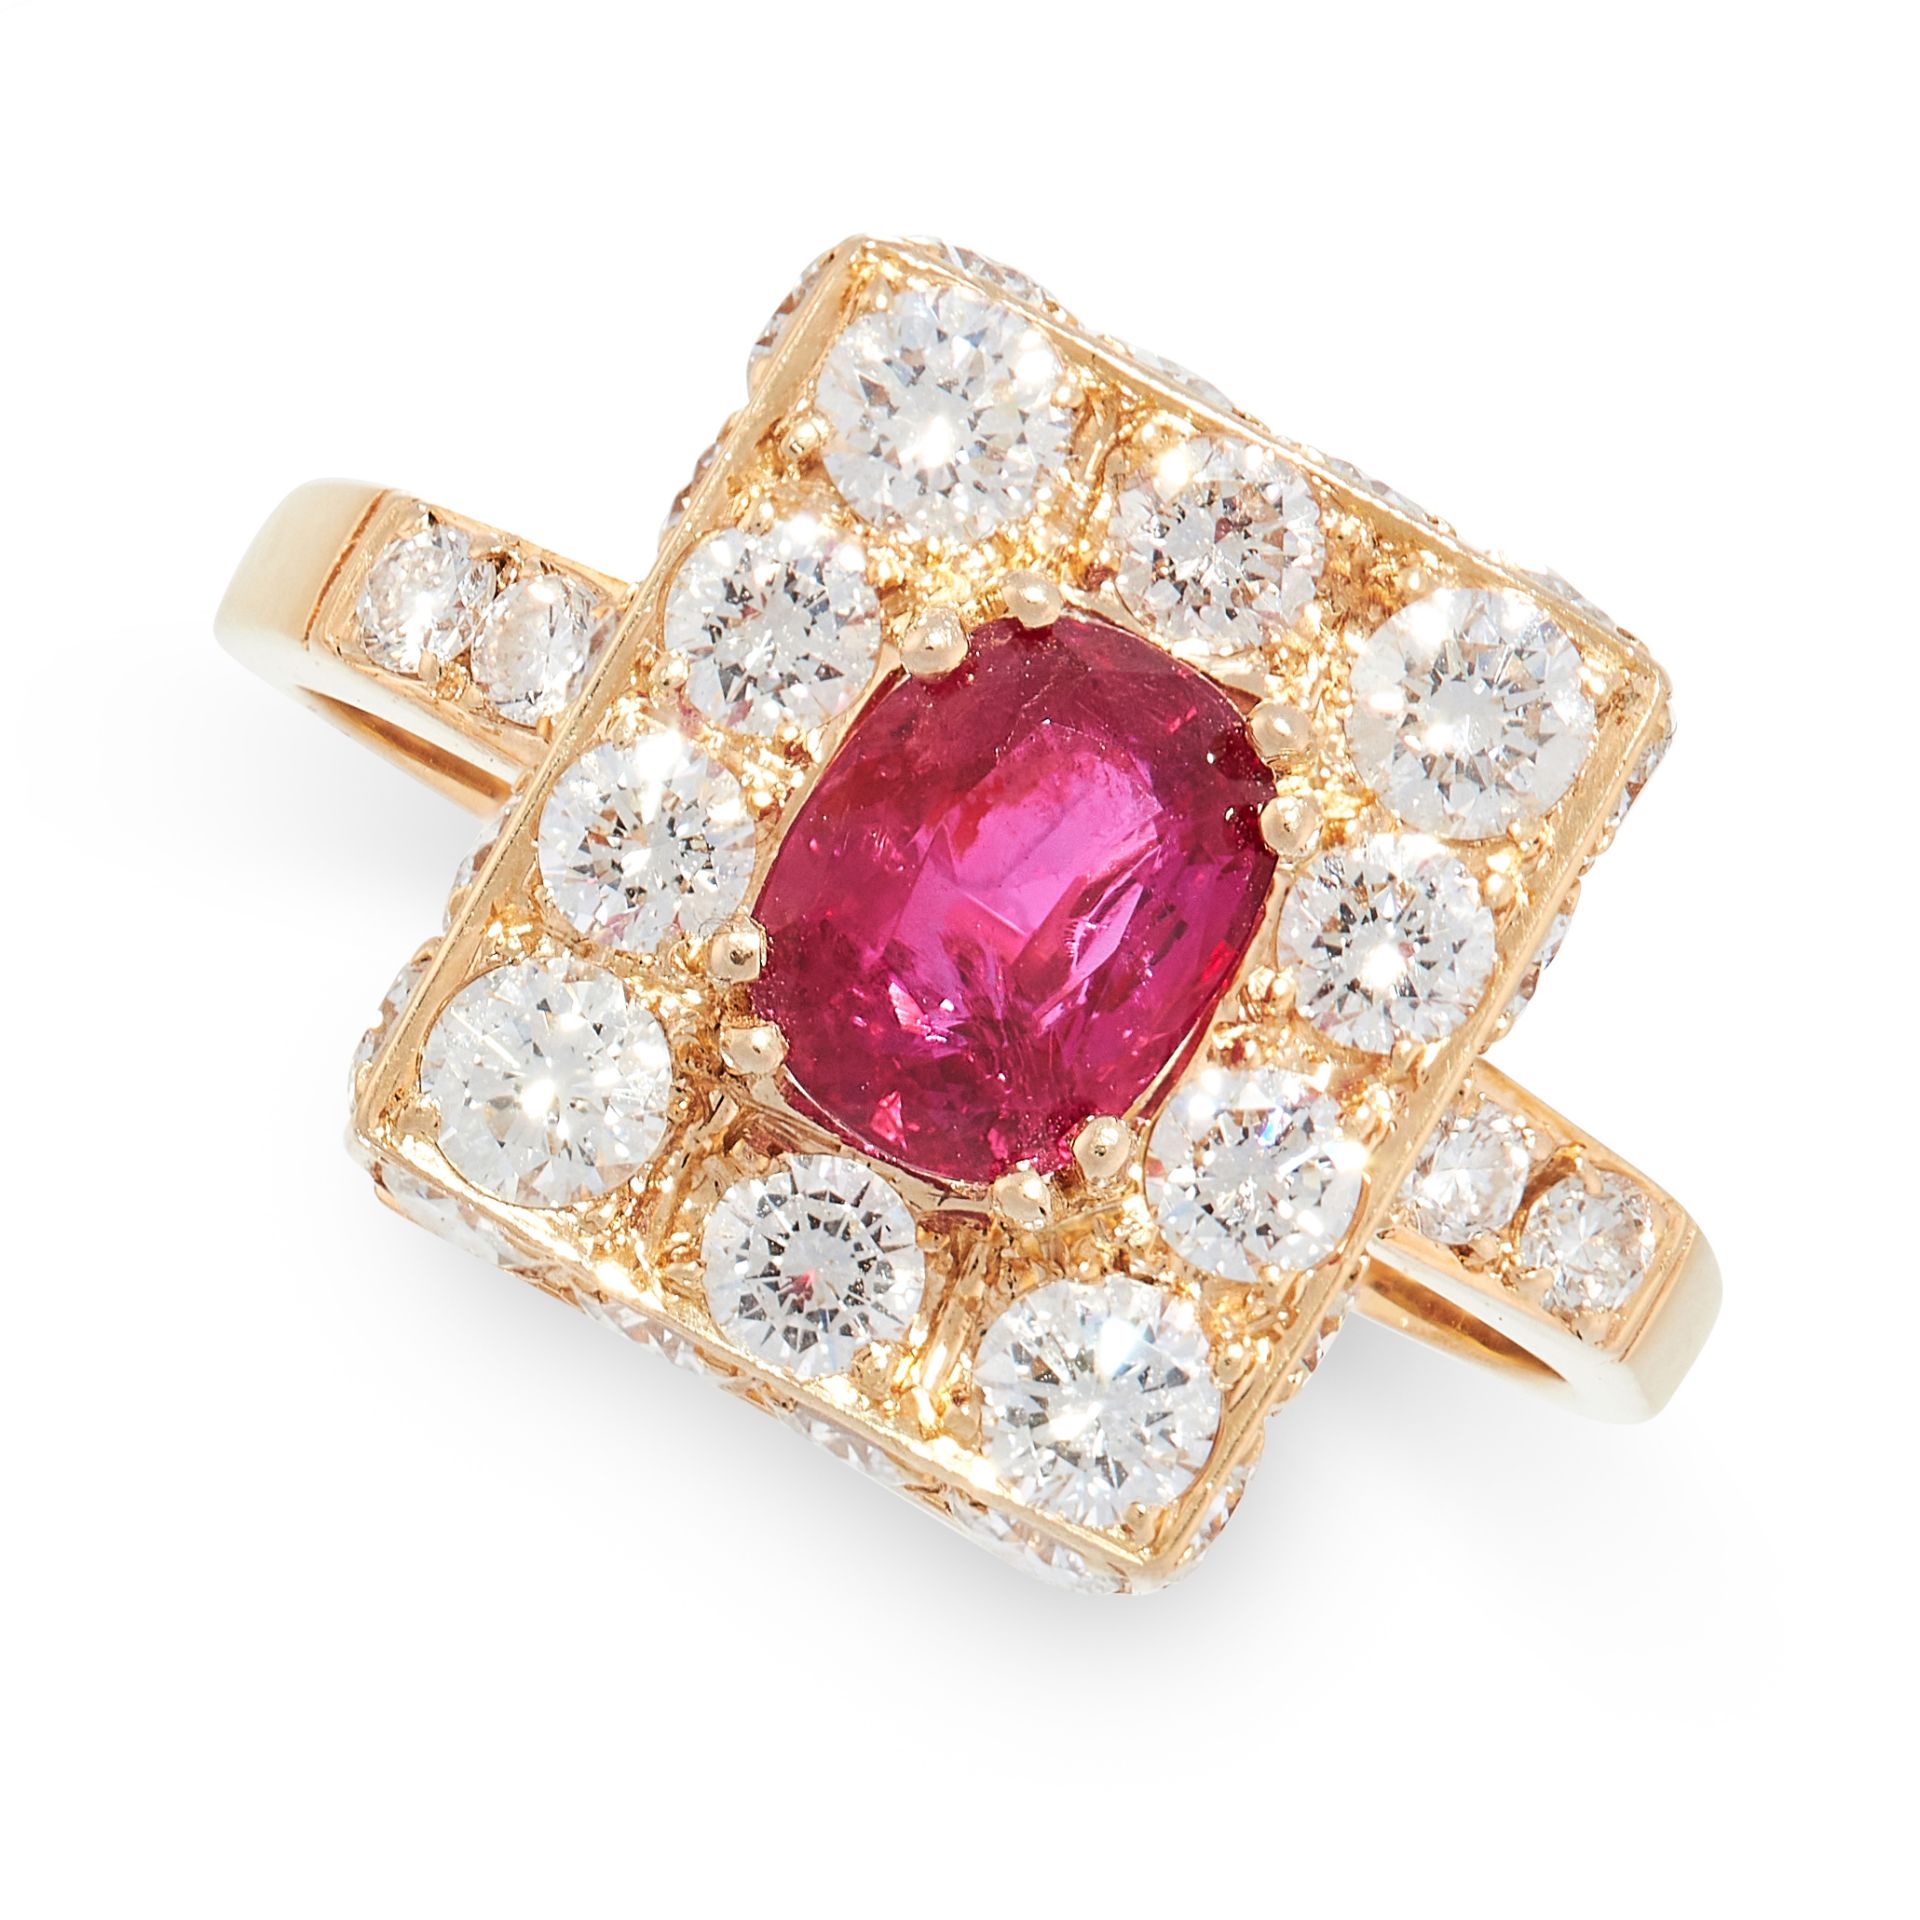 AN UNHEATED RUBY AND DIAMOND RING the rectangular face set with an oval cushion cut ruby of 1.38